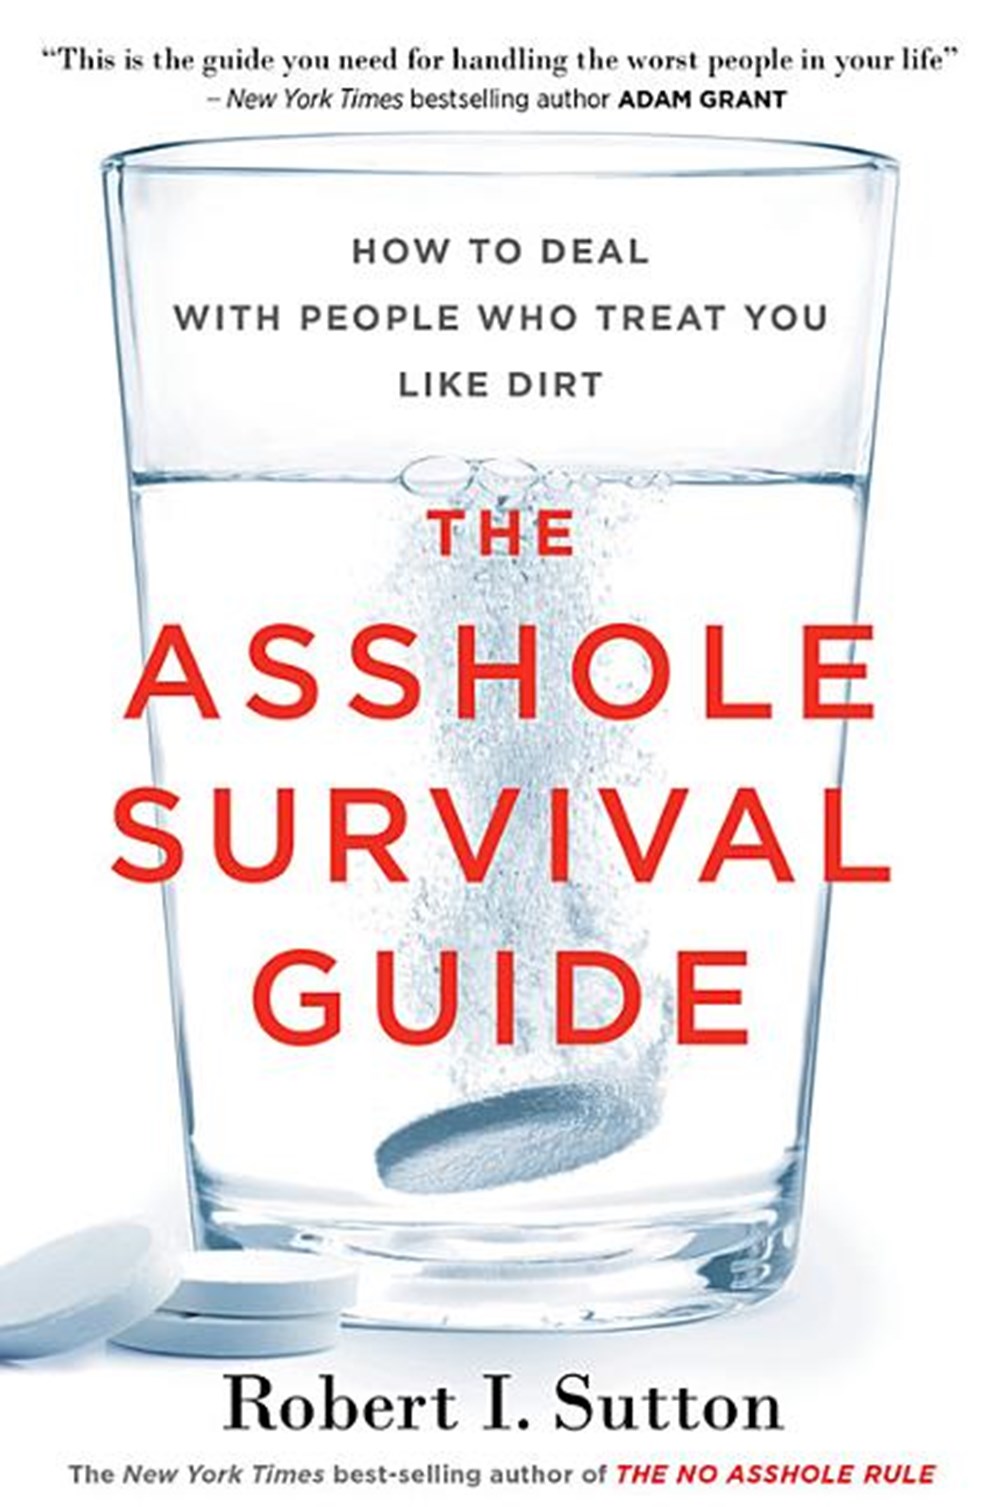 Asshole Survival Guide How to Deal with People Who Treat You Like Dirt